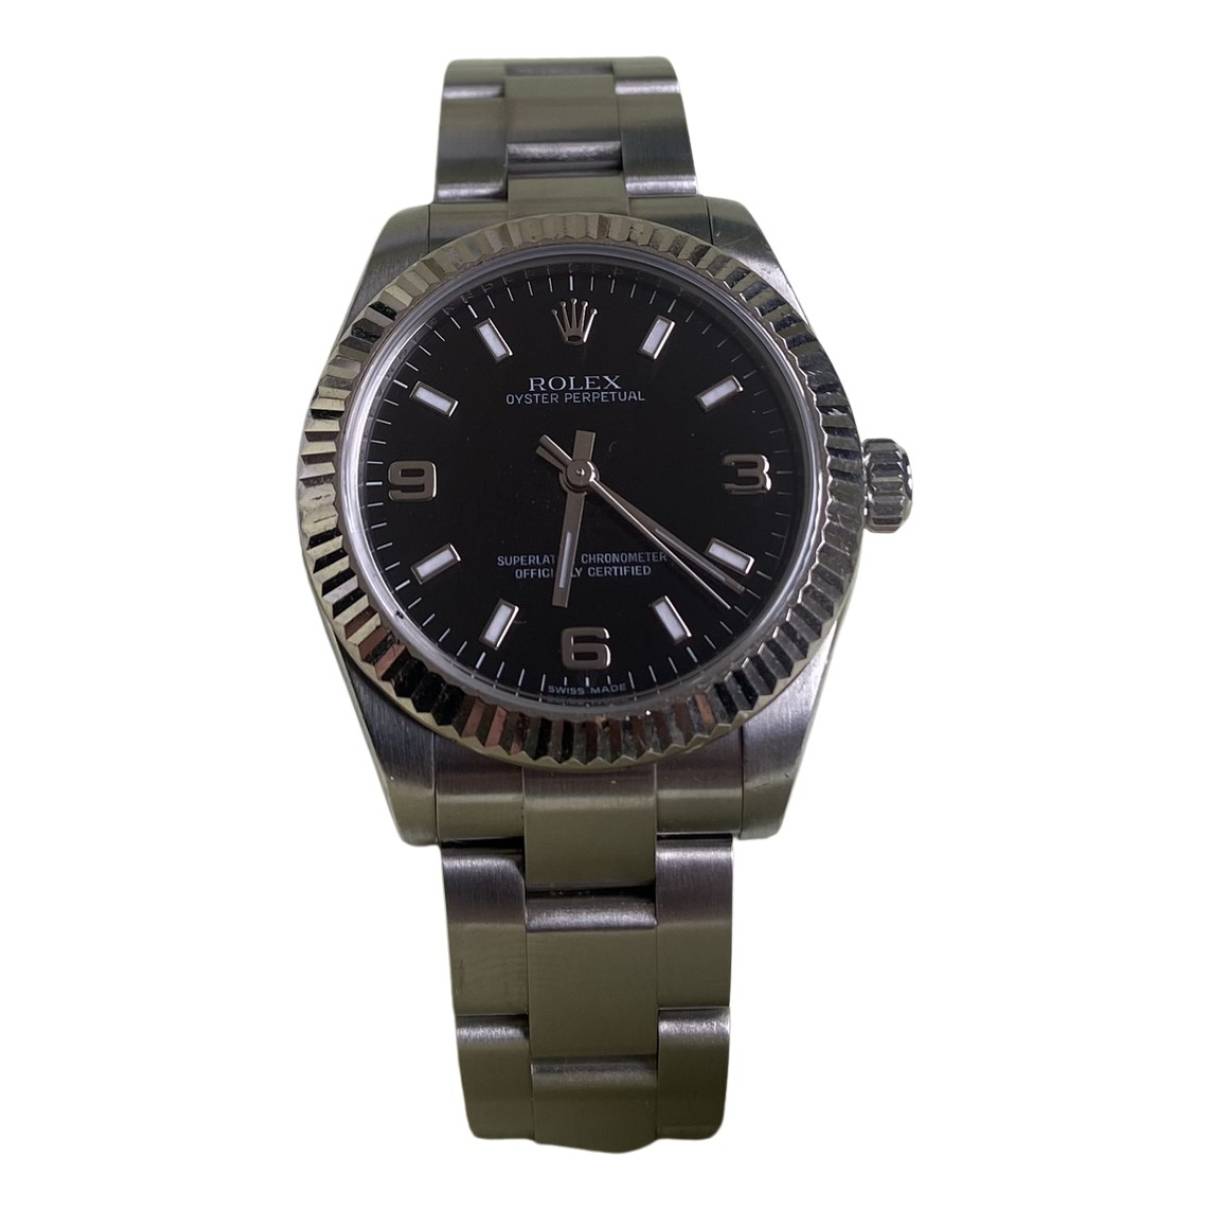 Oyster Perpetual 31mm watch Rolex